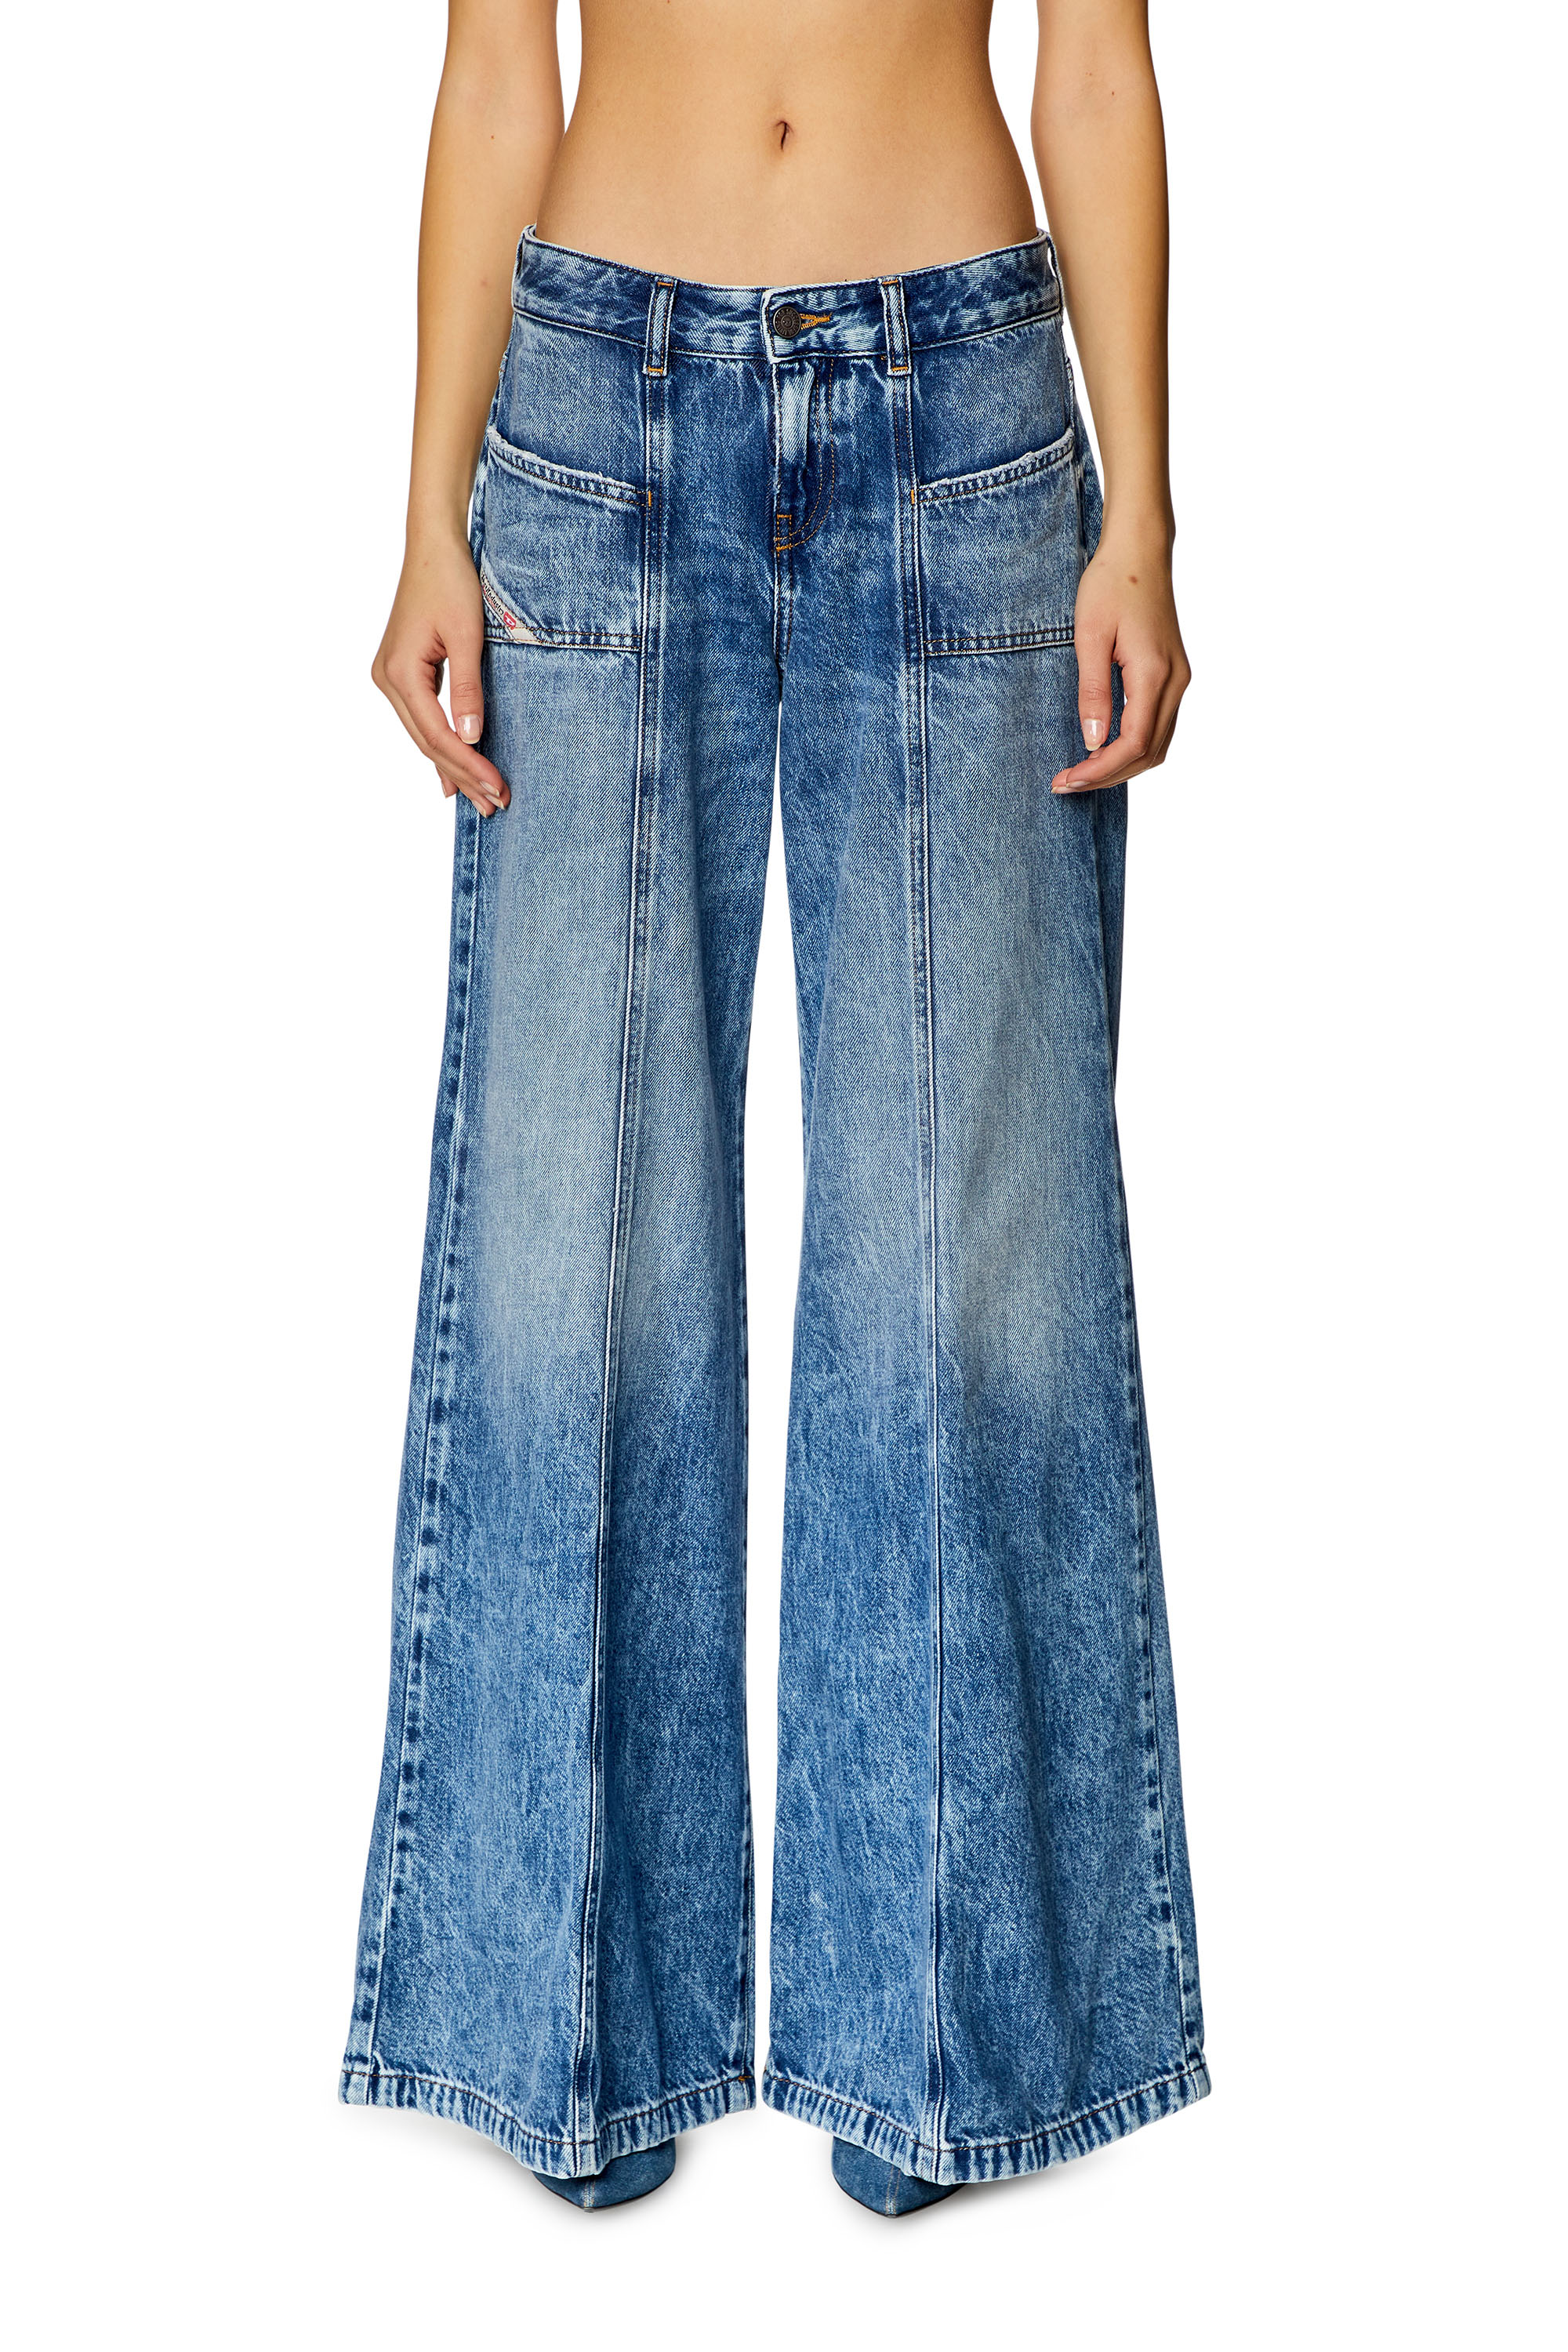 Diesel - Bootcut and Flare Jeans D-Akii 09H95, Mujer Bootcut y Flare Jeans - D-Akii in Azul marino - Image 2